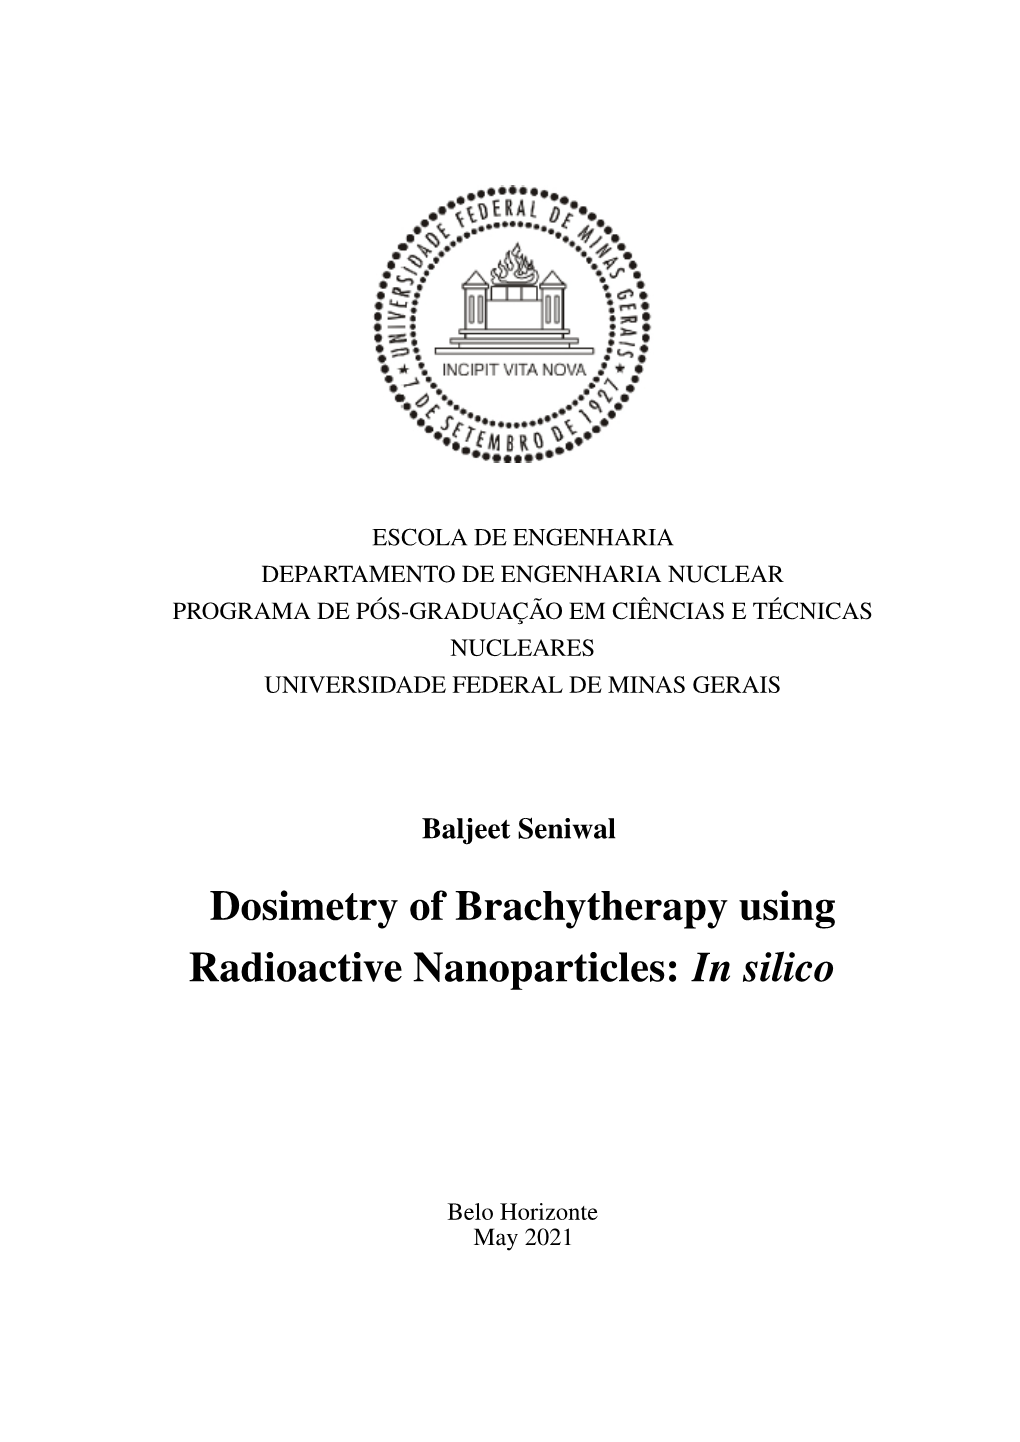 Dosimetry of Brachytherapy Using Radioactive Nanoparticles: in Silico